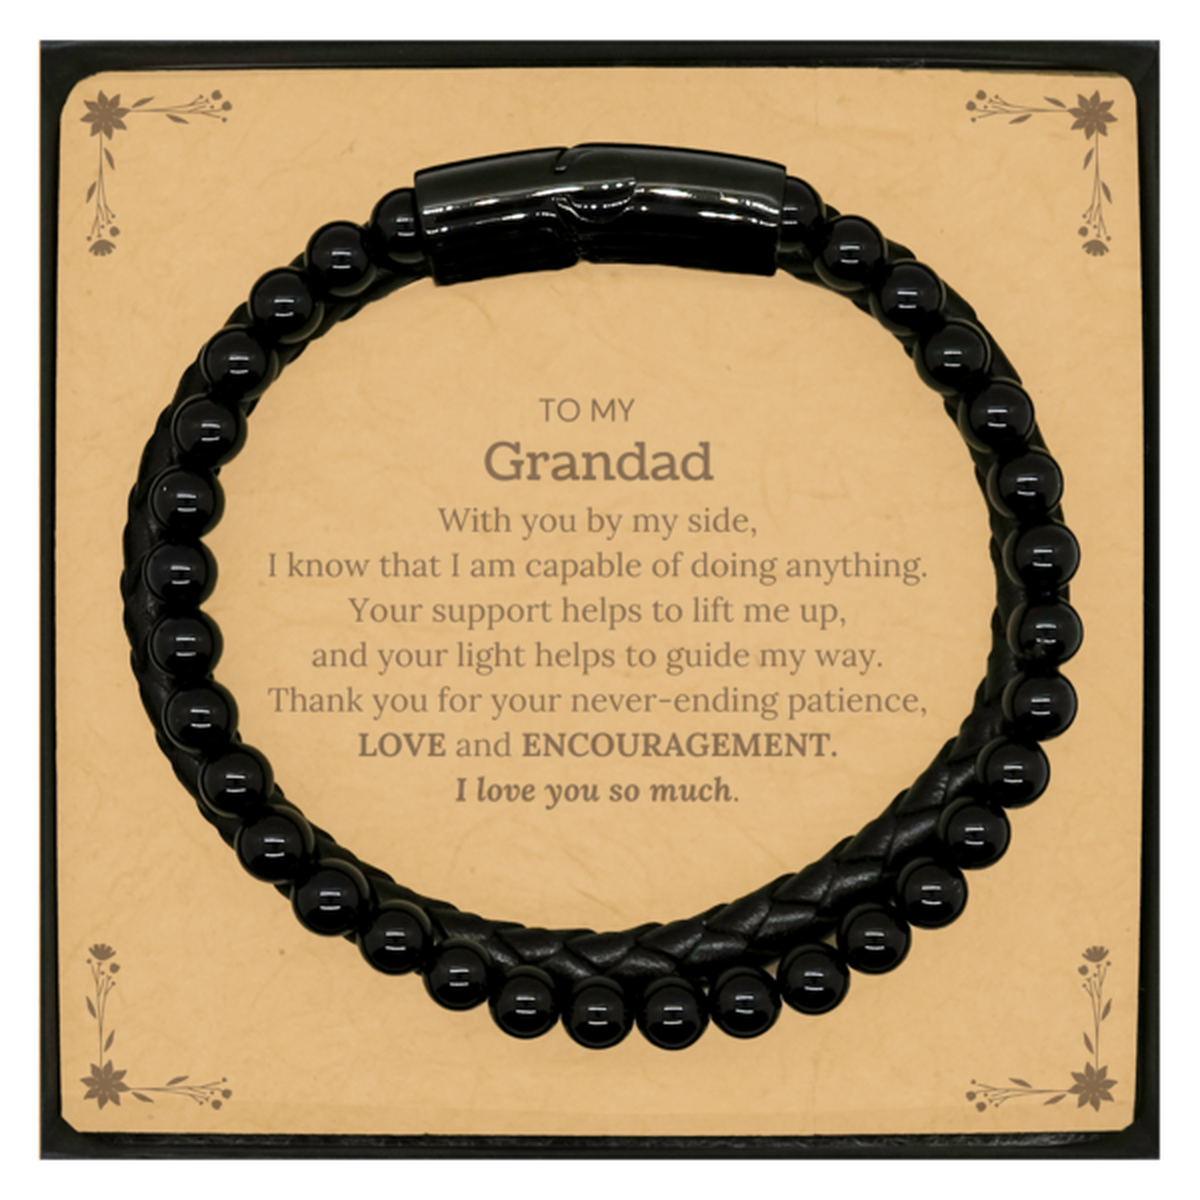 Appreciation Grandad Stone Leather Bracelets Gifts, To My Grandad Birthday Christmas Wedding Keepsake Gifts for Grandad With you by my side, I know that I am capable of doing anything. I love you so much